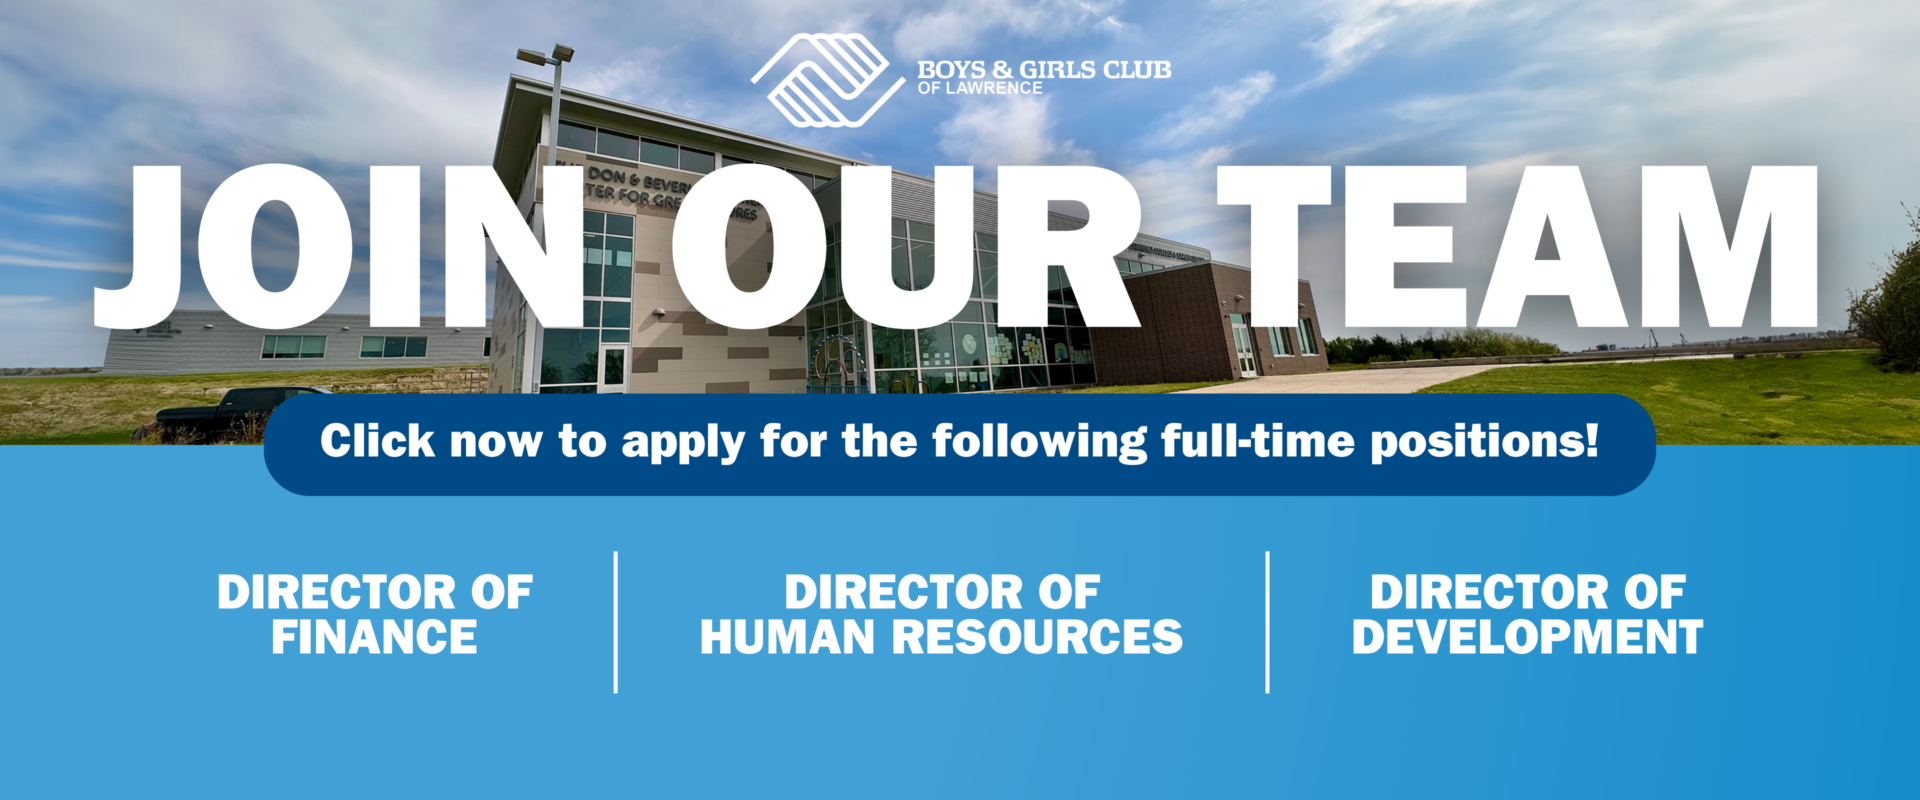 Now hiring at Boys & Girls Club of Lawrence, Kansas for Director of Finance, Director of Human Resources, Director of Development